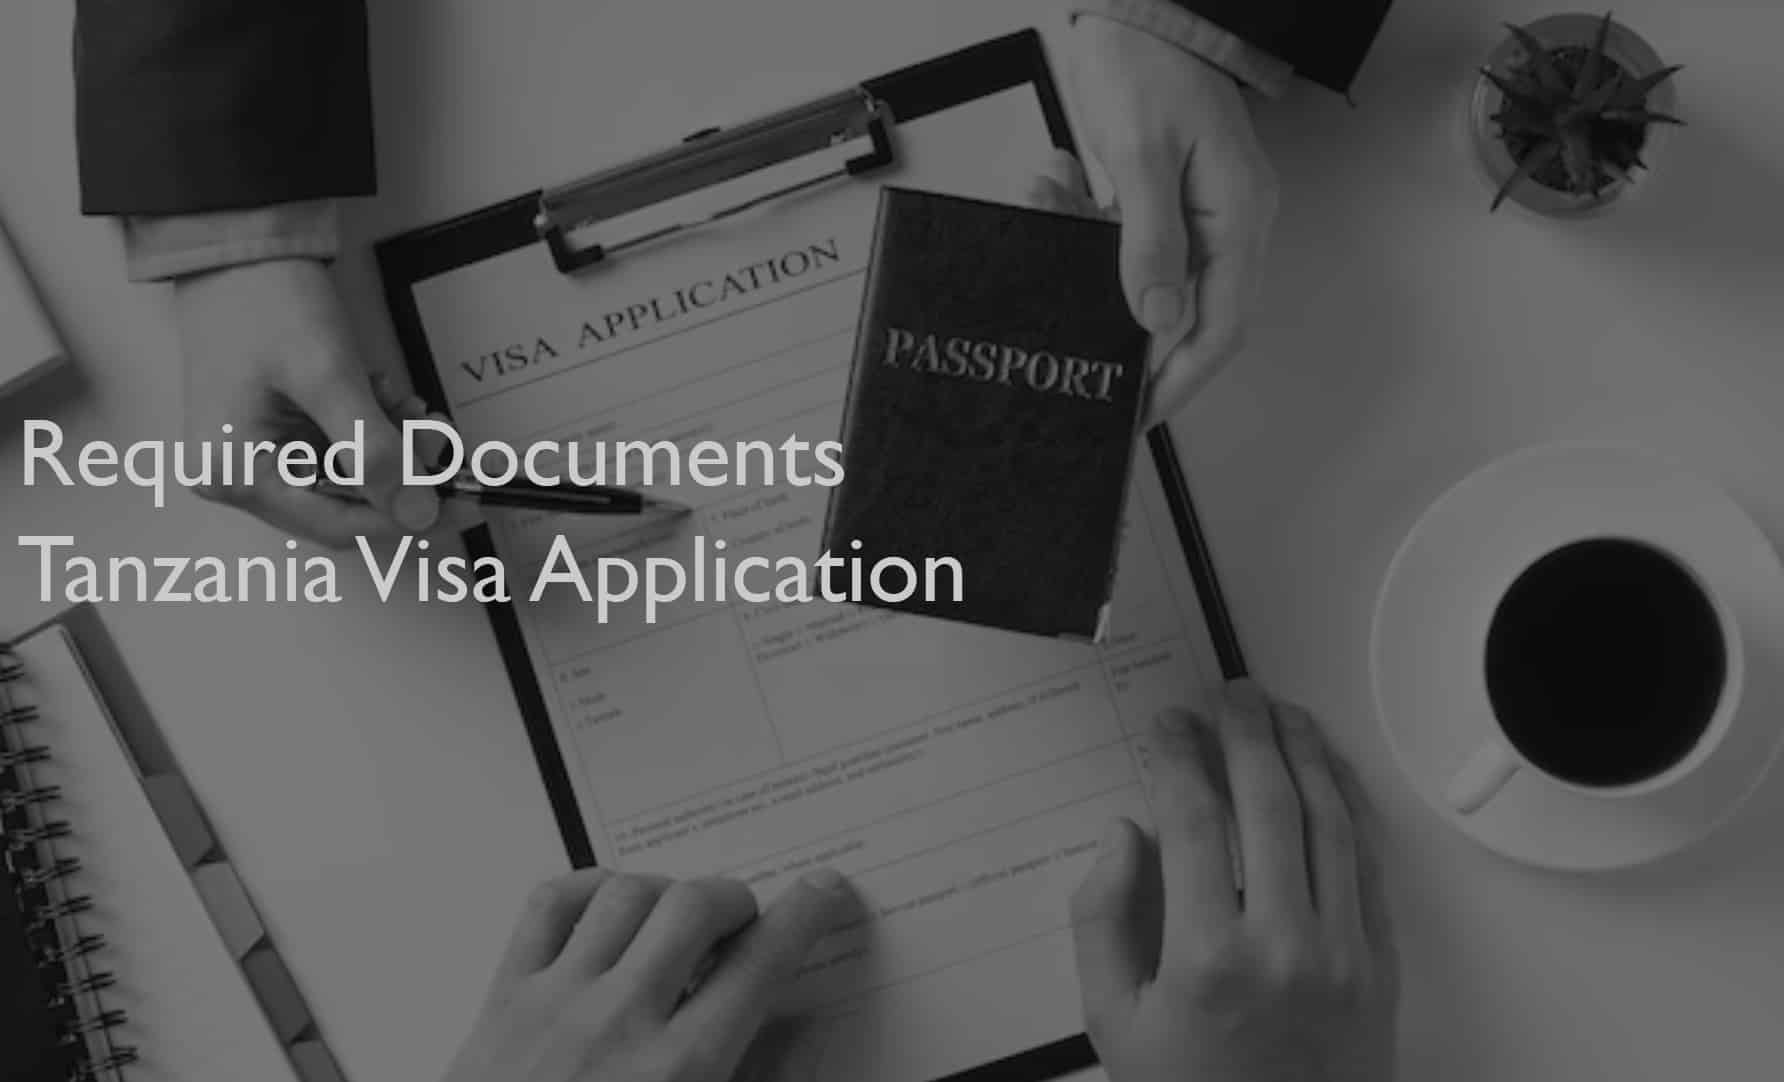 Required Documents for the Visa Application